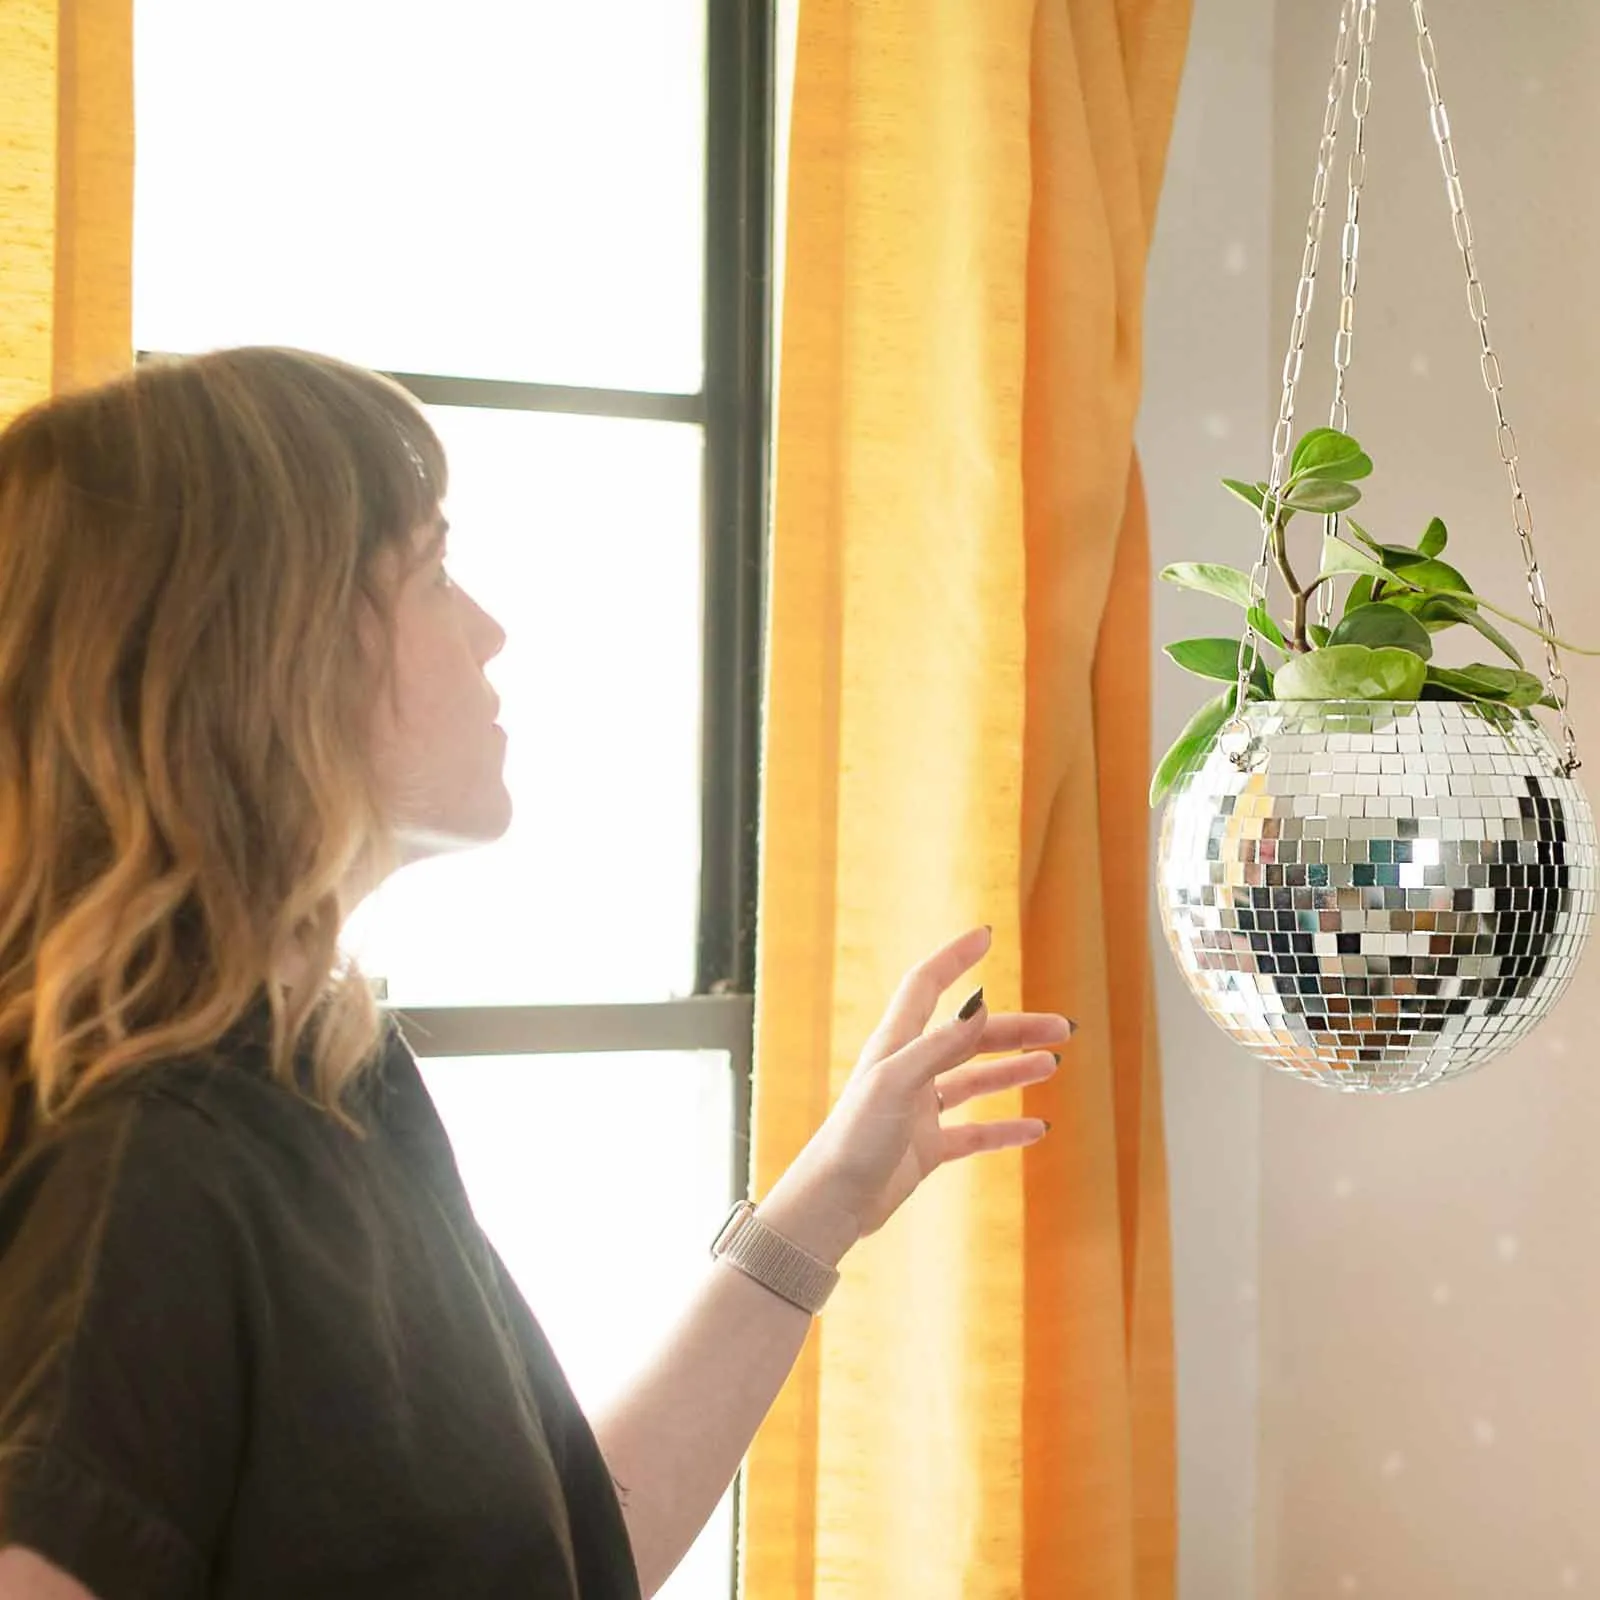 1PC Disco Ball Planter Globe Shape Hanging Vase Flower Planter Pots Rope Hanging Wall Homw Decor Vase Container Room Decoration